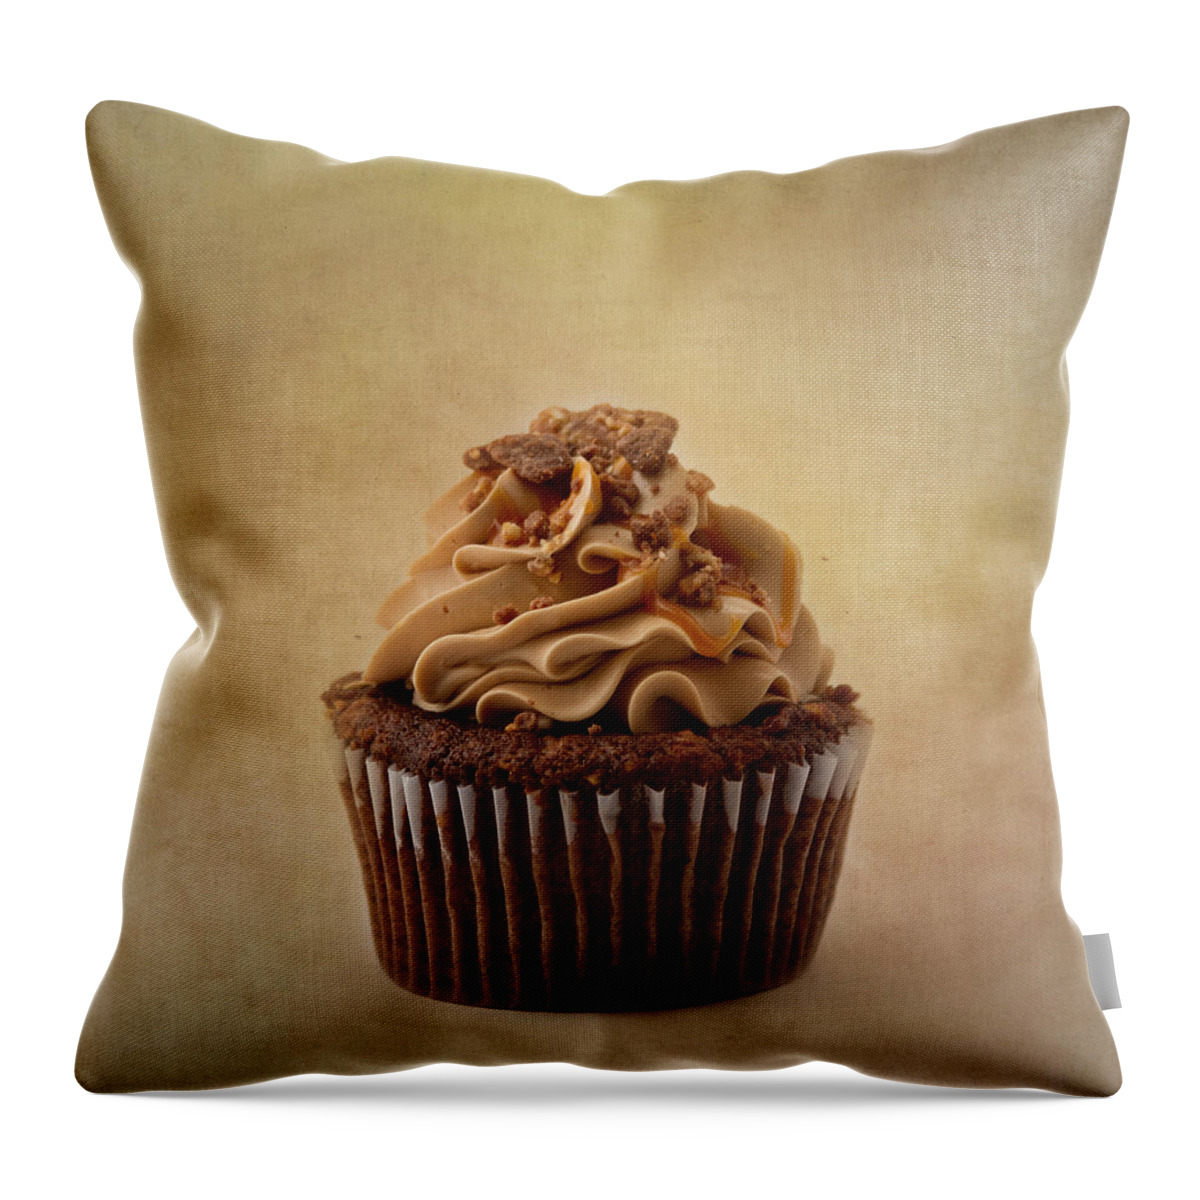 Chocolate Throw Pillow featuring the photograph For the Chocolate Lover by Kim Hojnacki